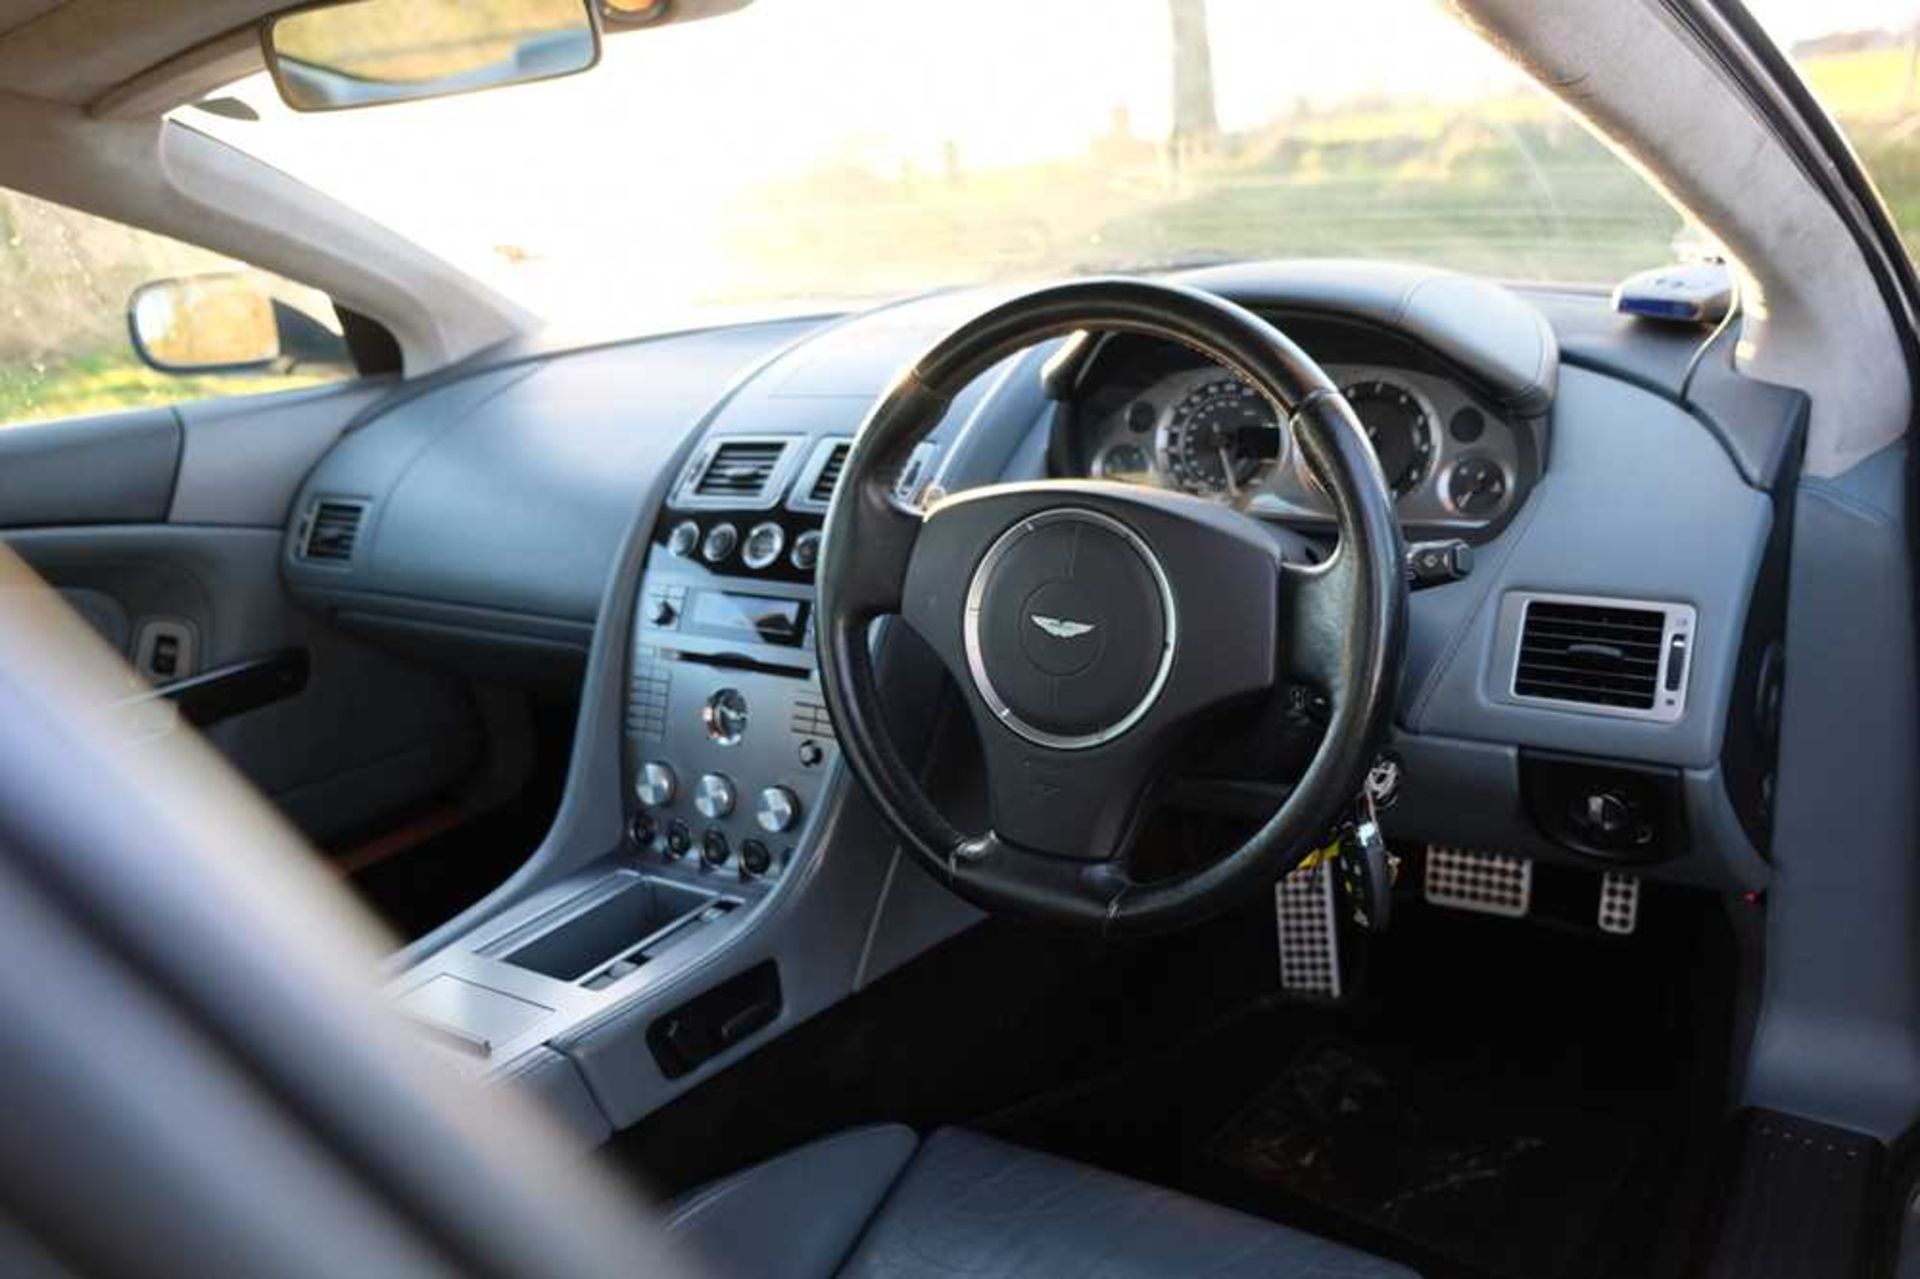 2005 Aston Martin DB9 c.25,000 from new and 4 former keepers - Image 28 of 59